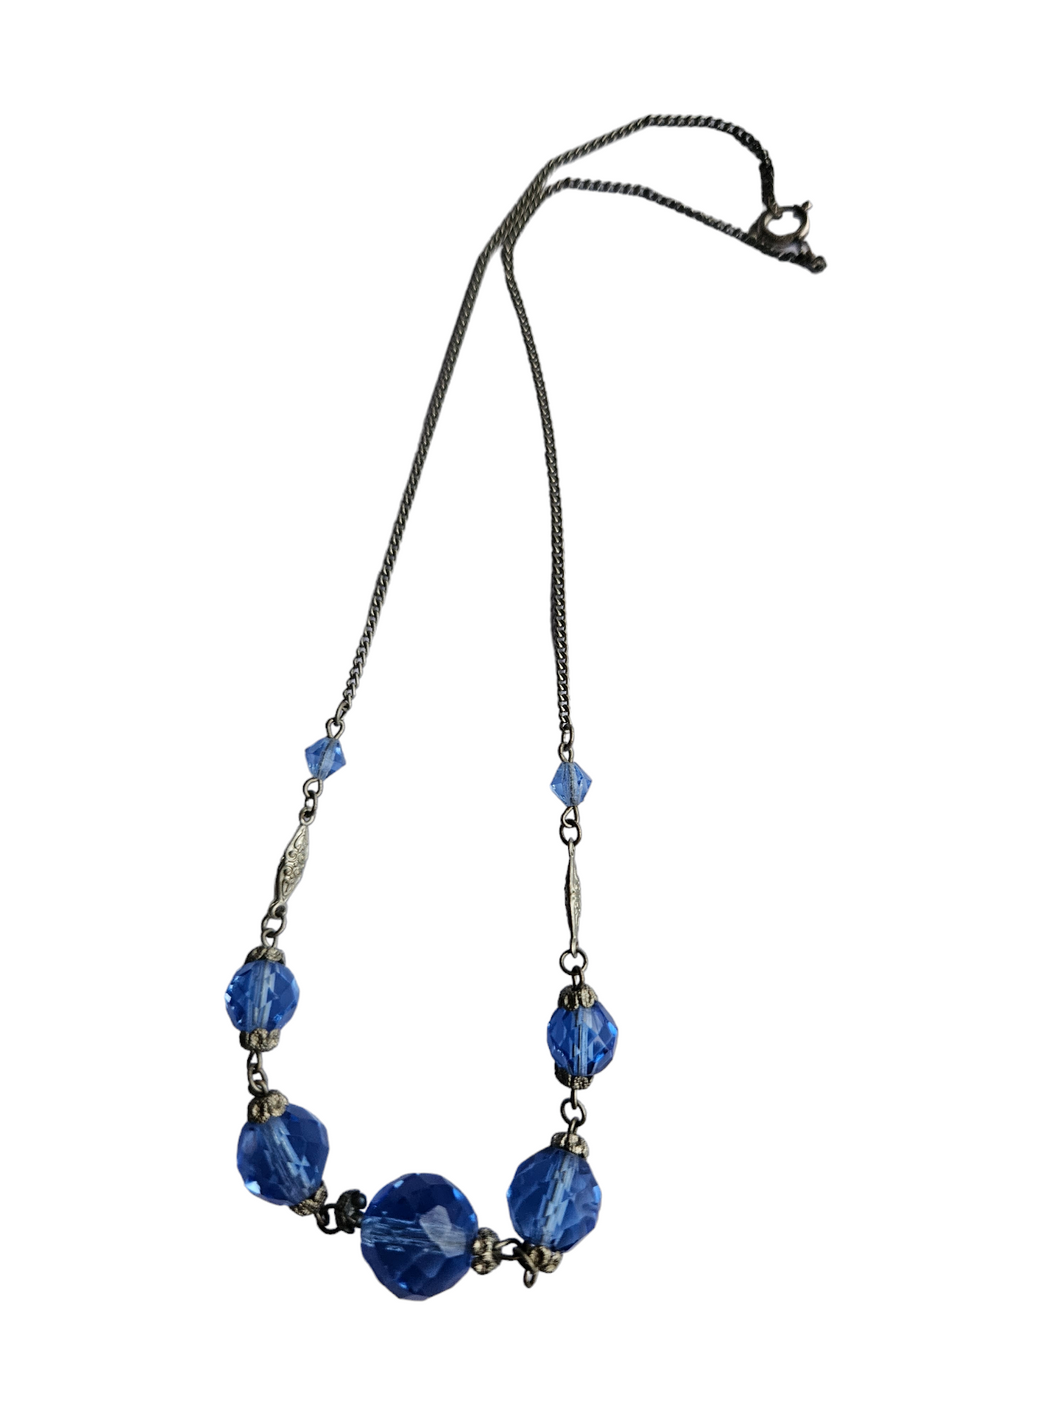 1930s Deco Blue Glass and Chain Necklace